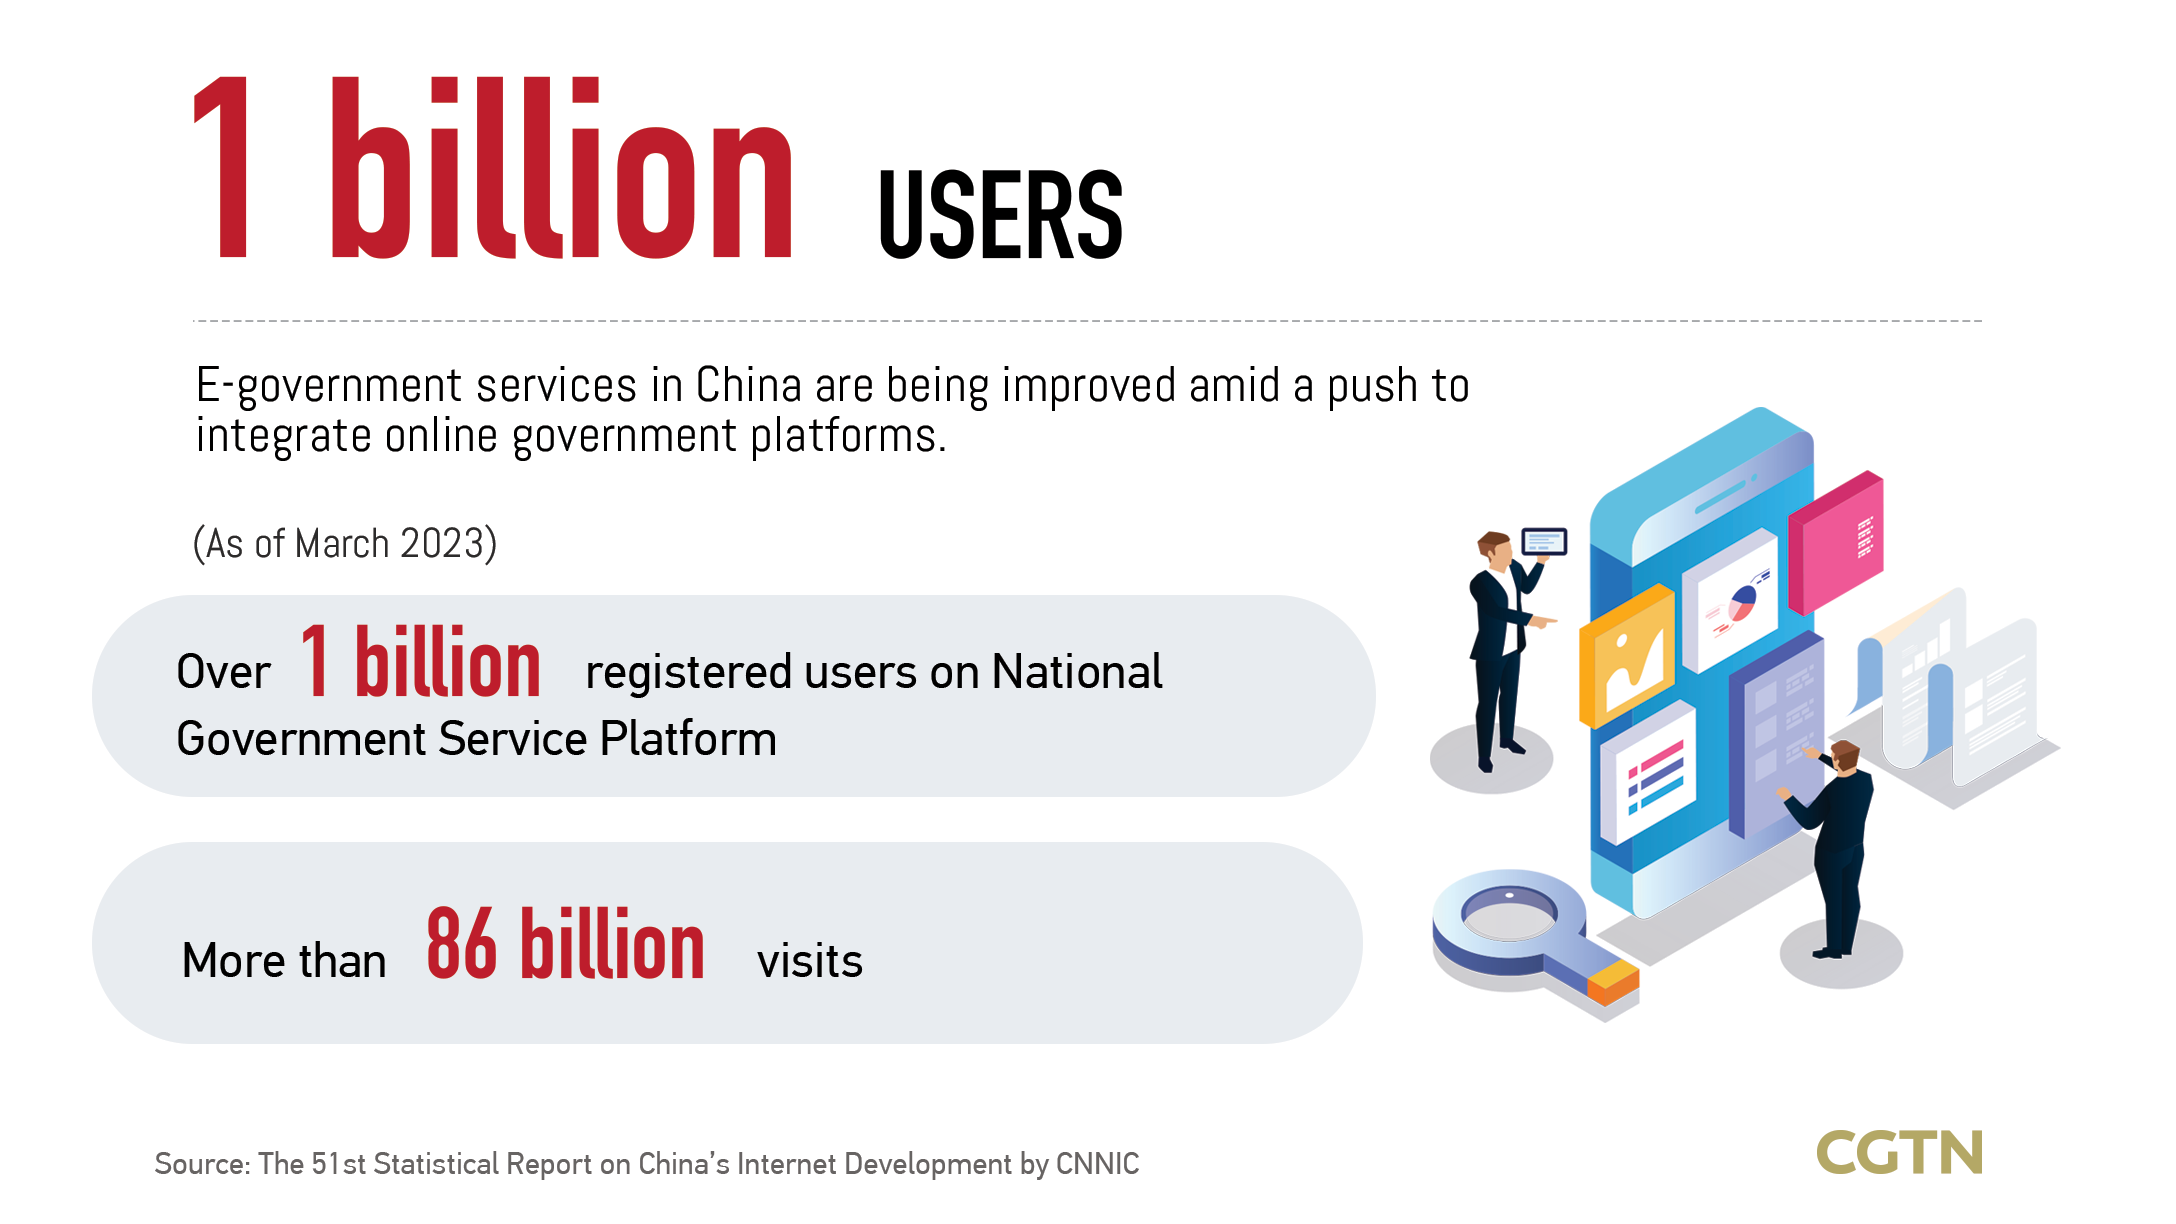 Graphics: Going digital! China's plan to enhance e-government services